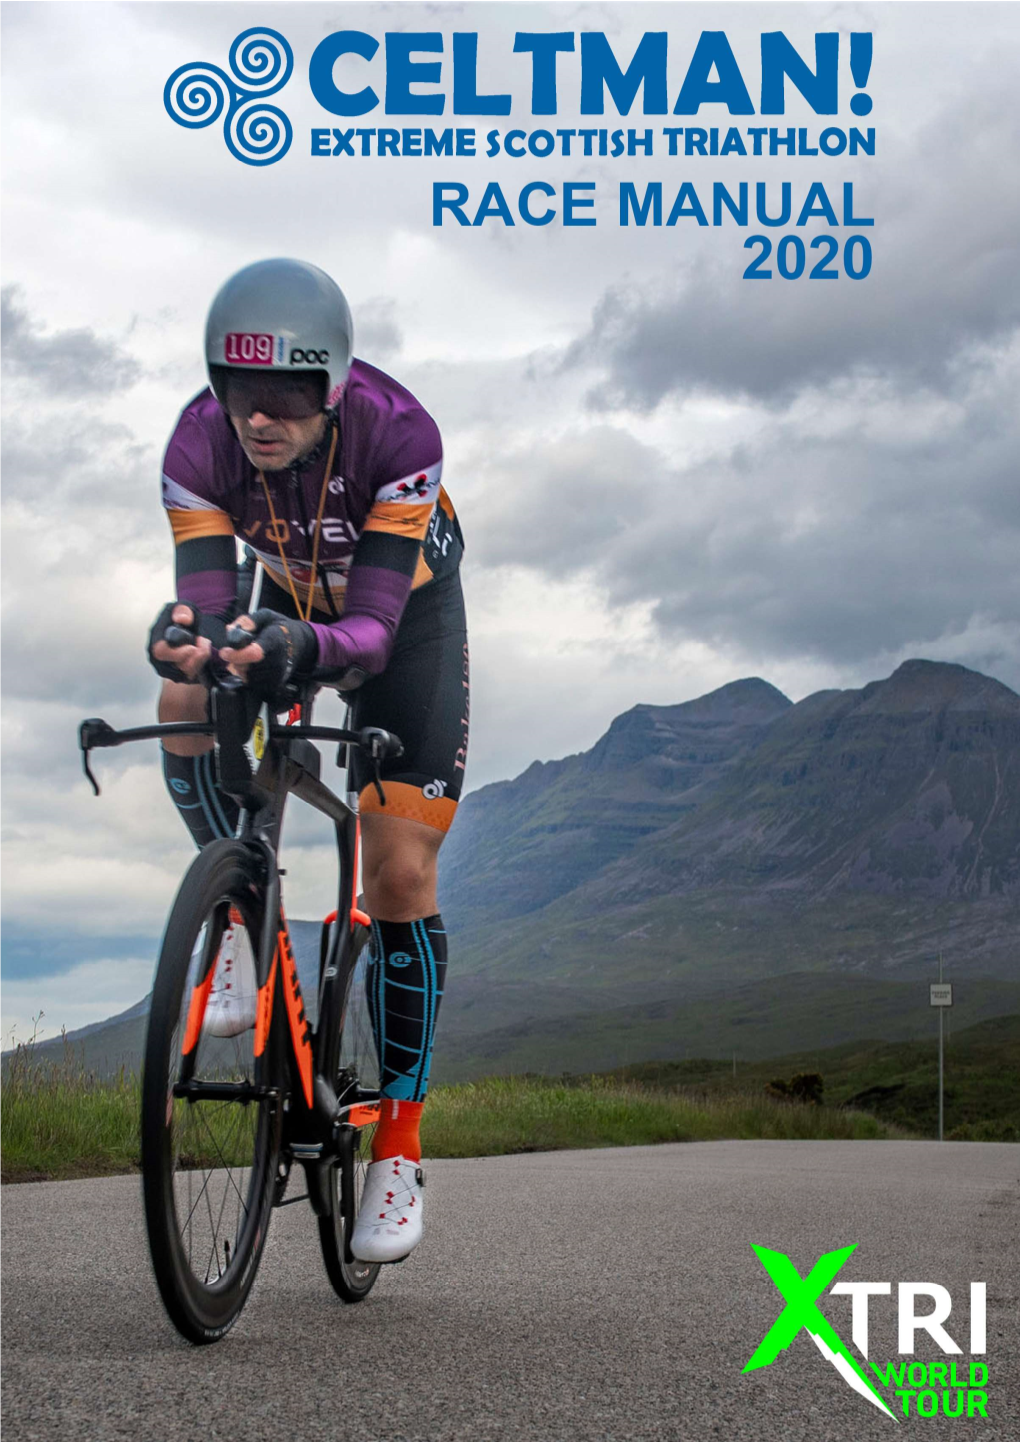 Race Manual ‐ There Will Be a Post‐Race Buffet at the Loch Torridon Community Hall